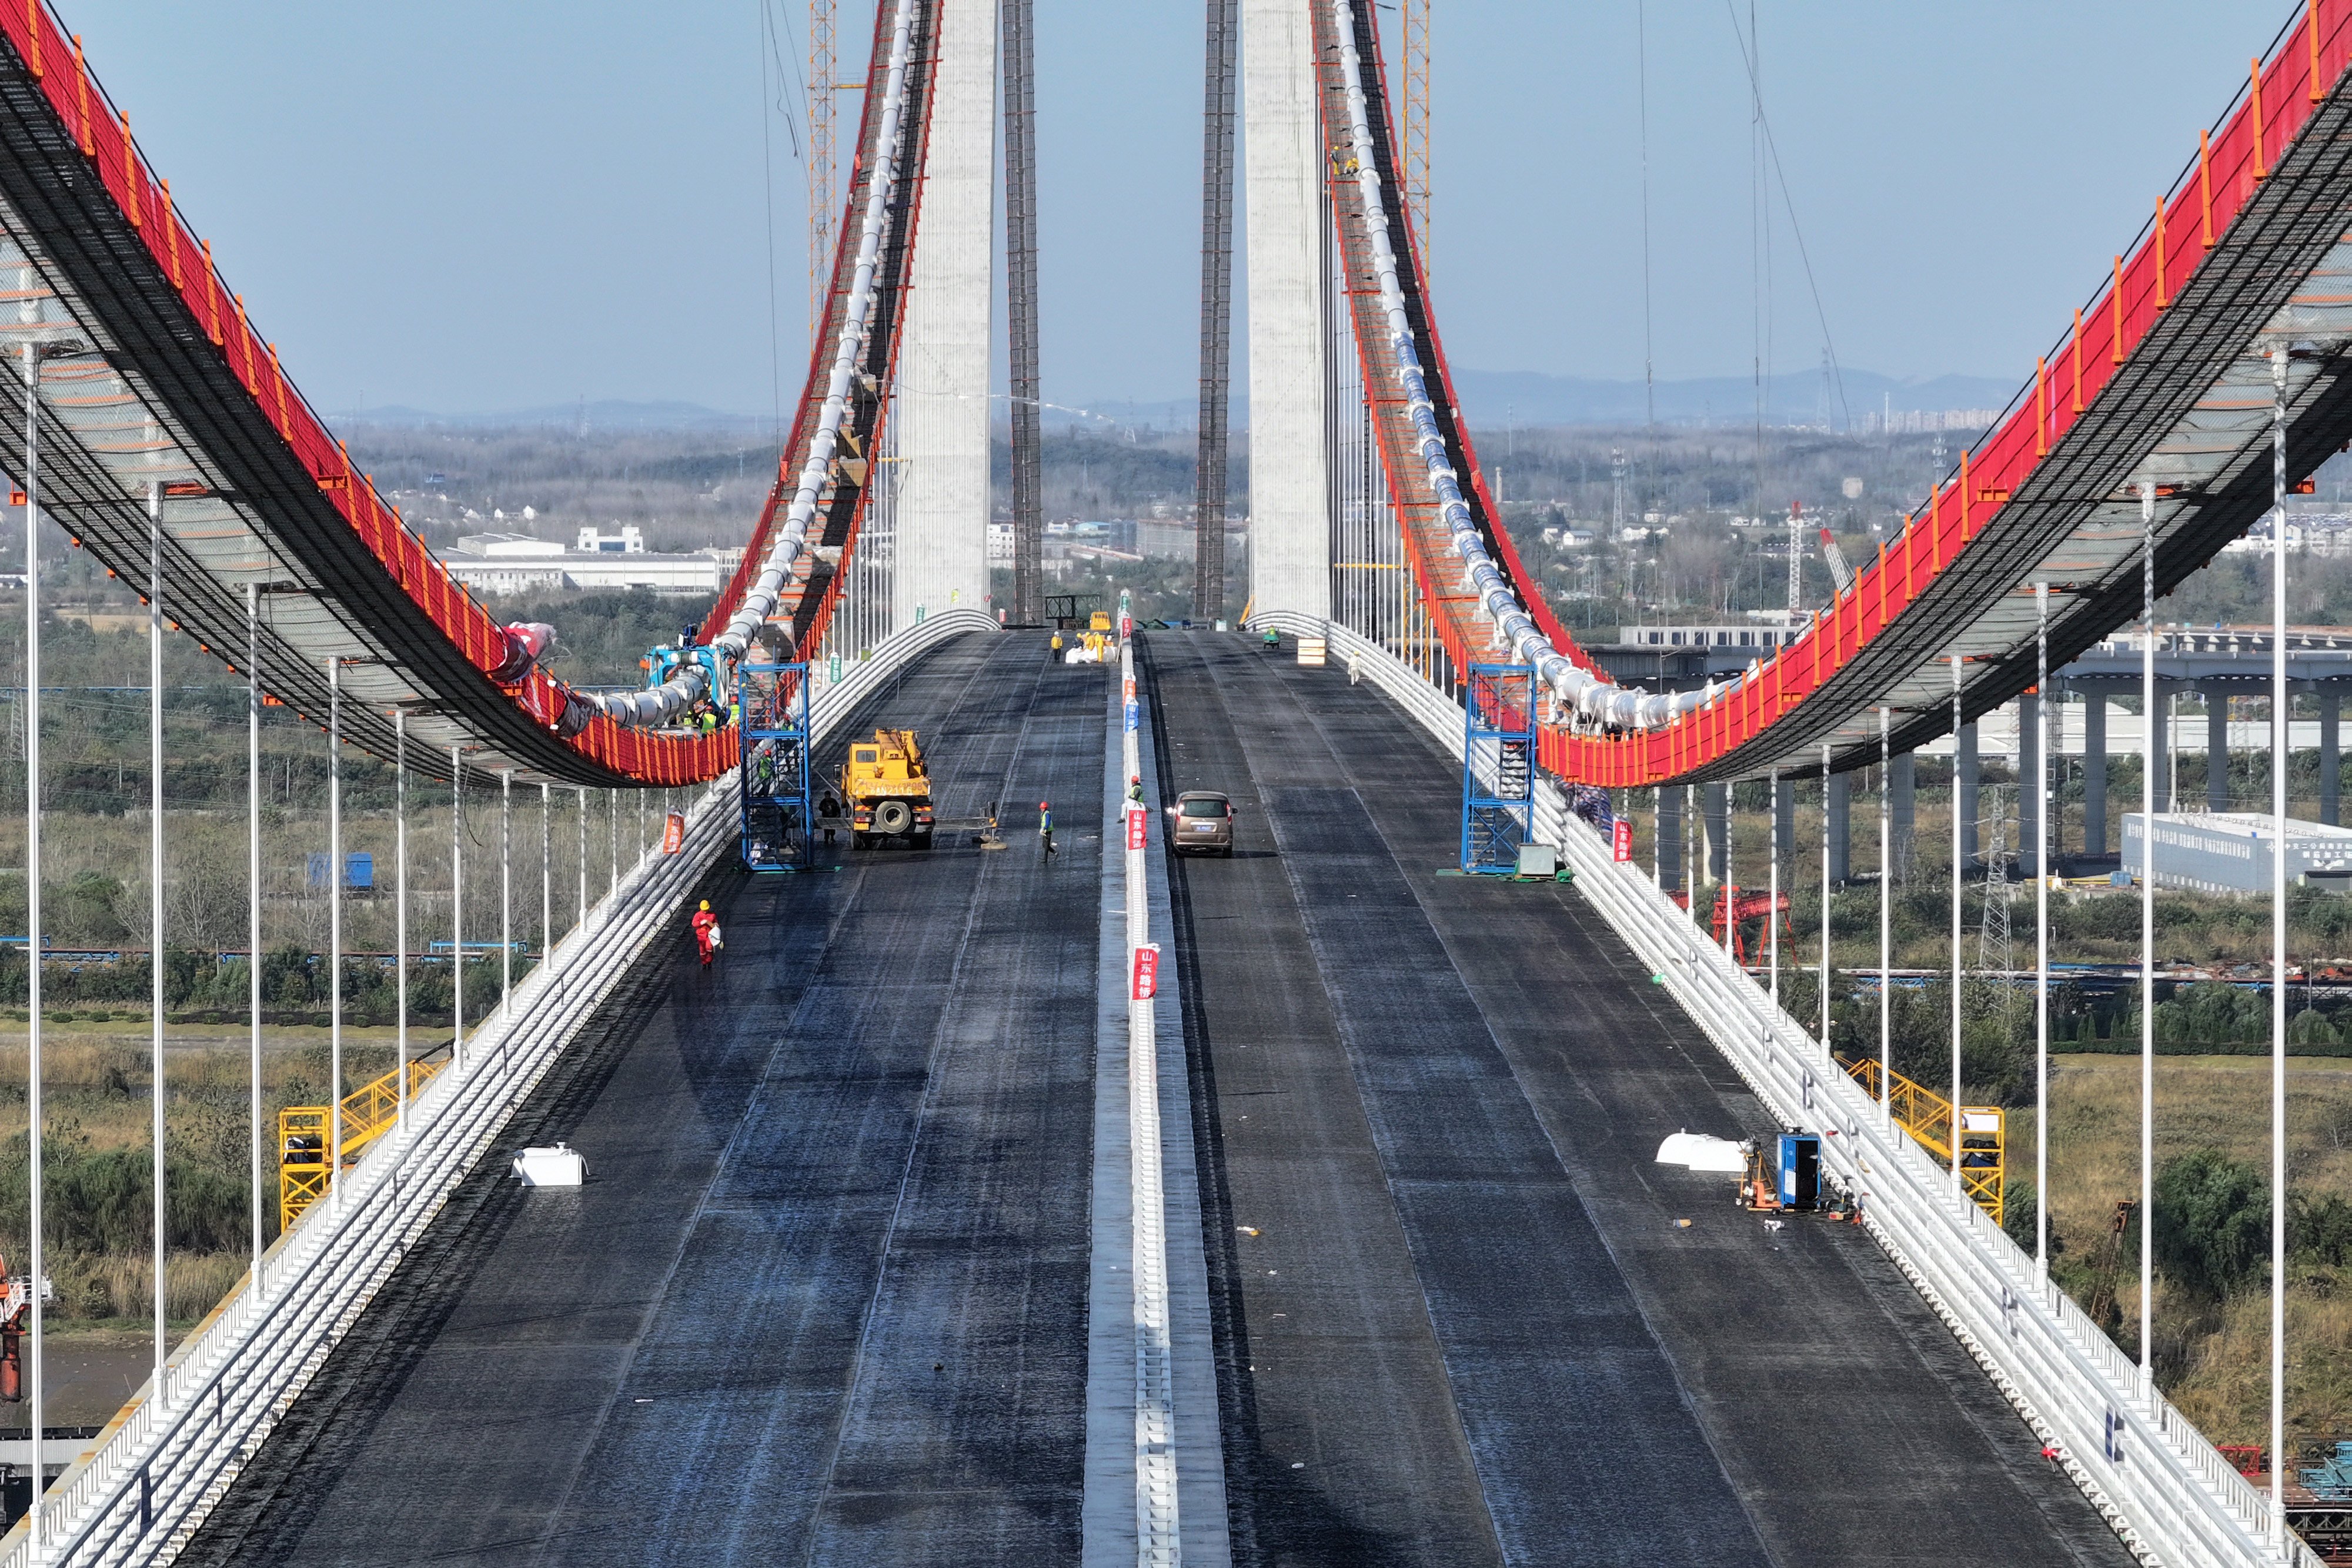 Workers work on the steel deck of the main bridge of the Xianxin Road Yangtze River Bridge in Nanjing, in China’s eastern Jiangsu province, in this file photo from November. Photo: Getty Images